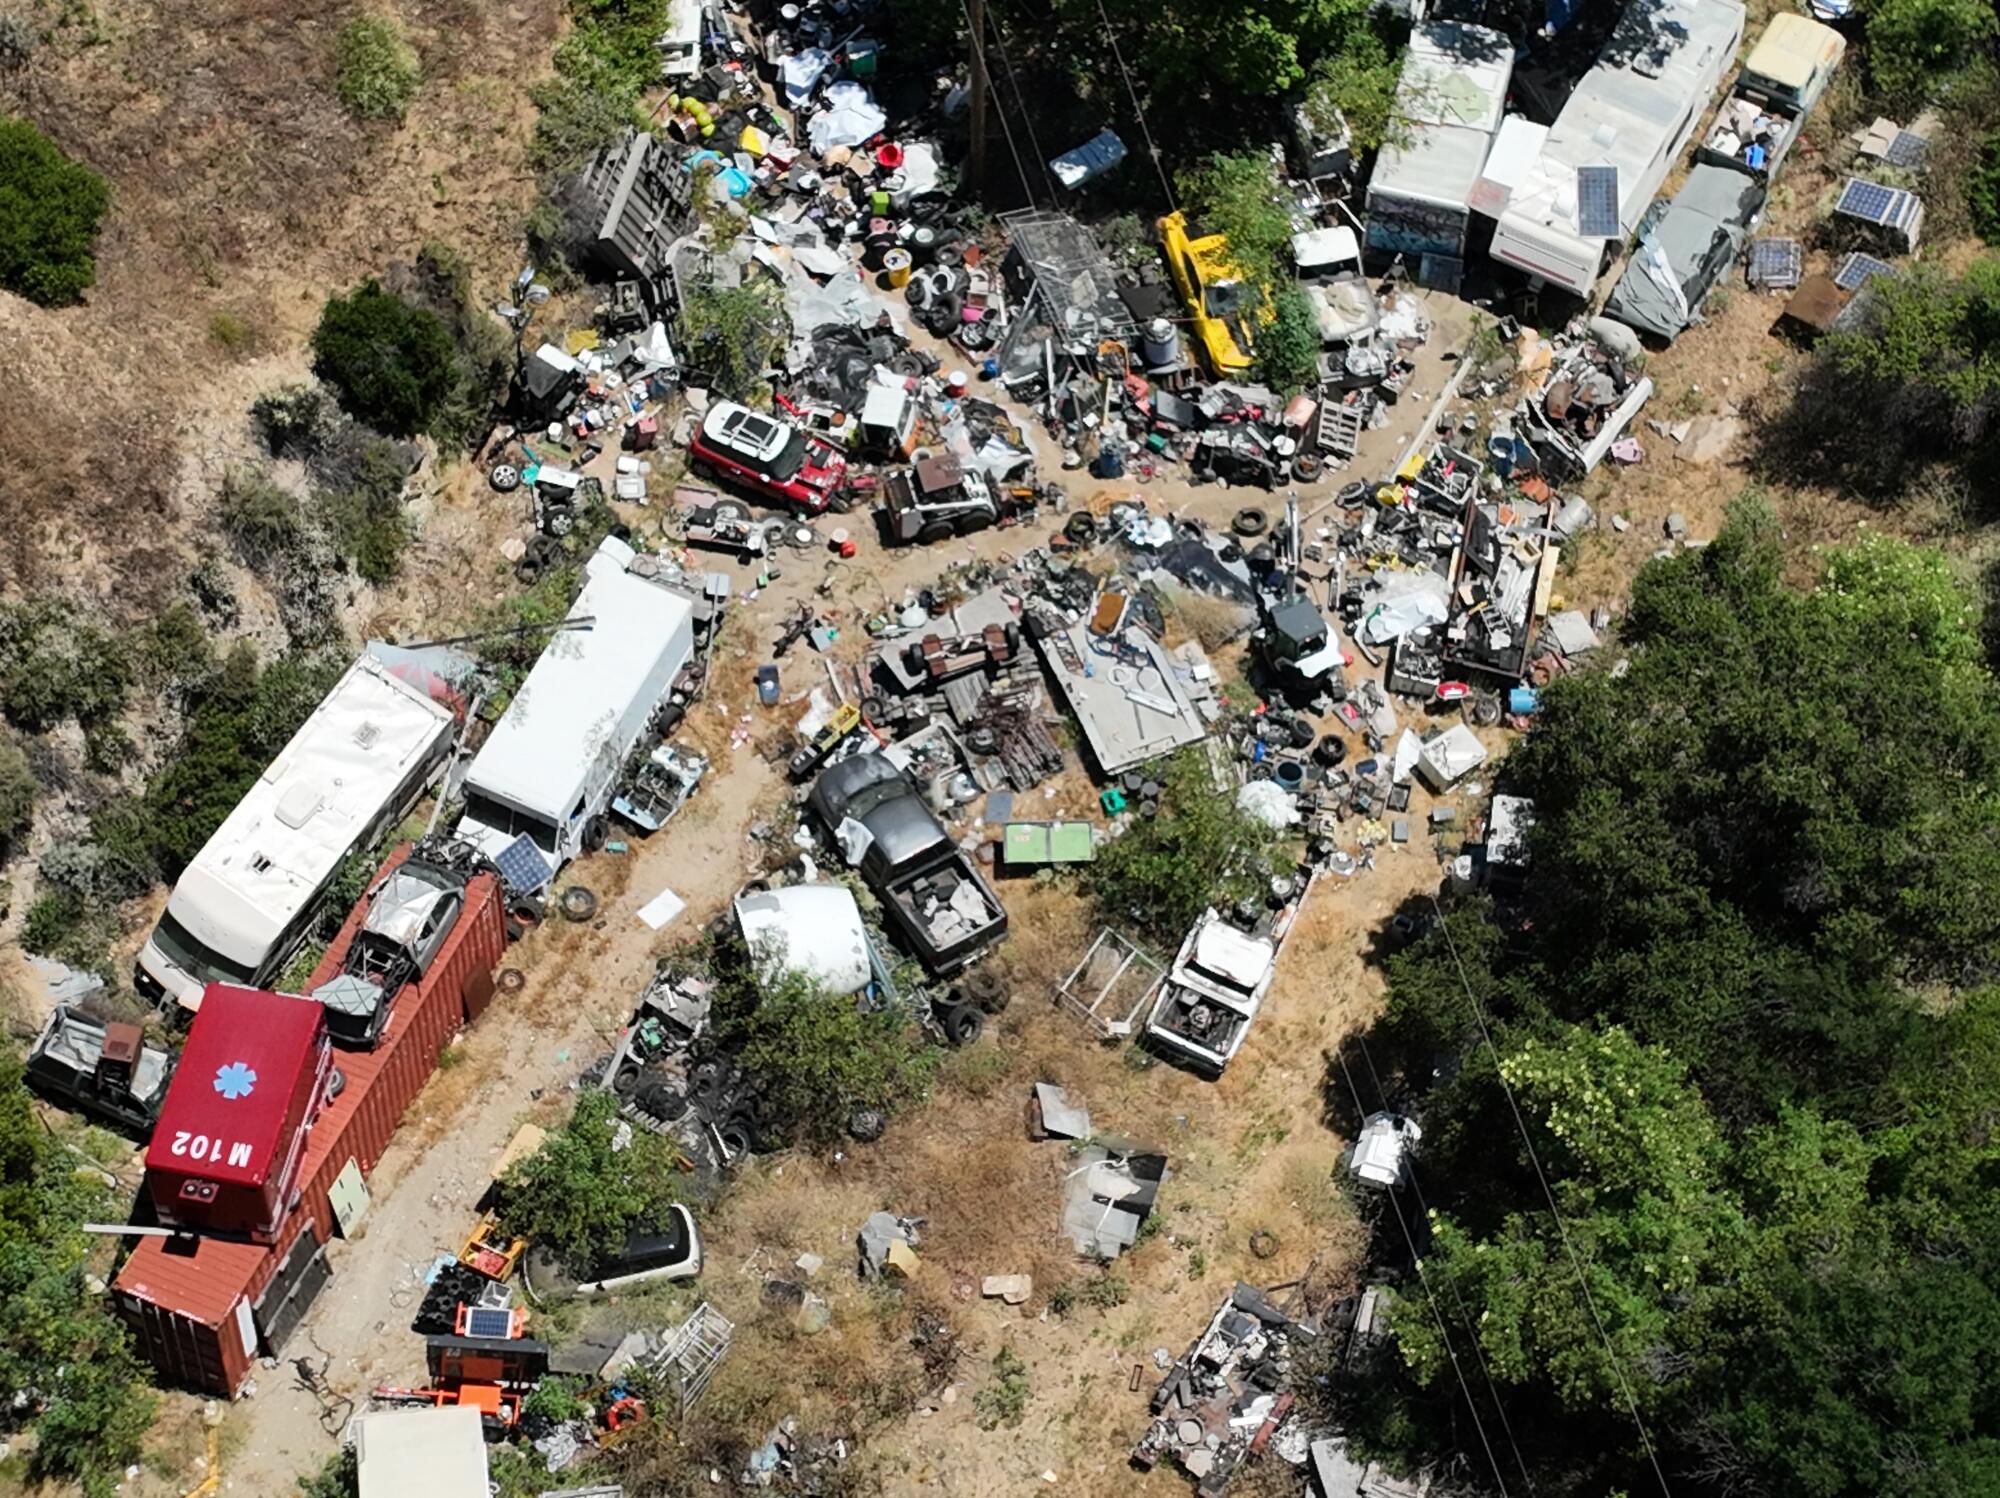 An aerial view of a property littered with objects and vehicles.